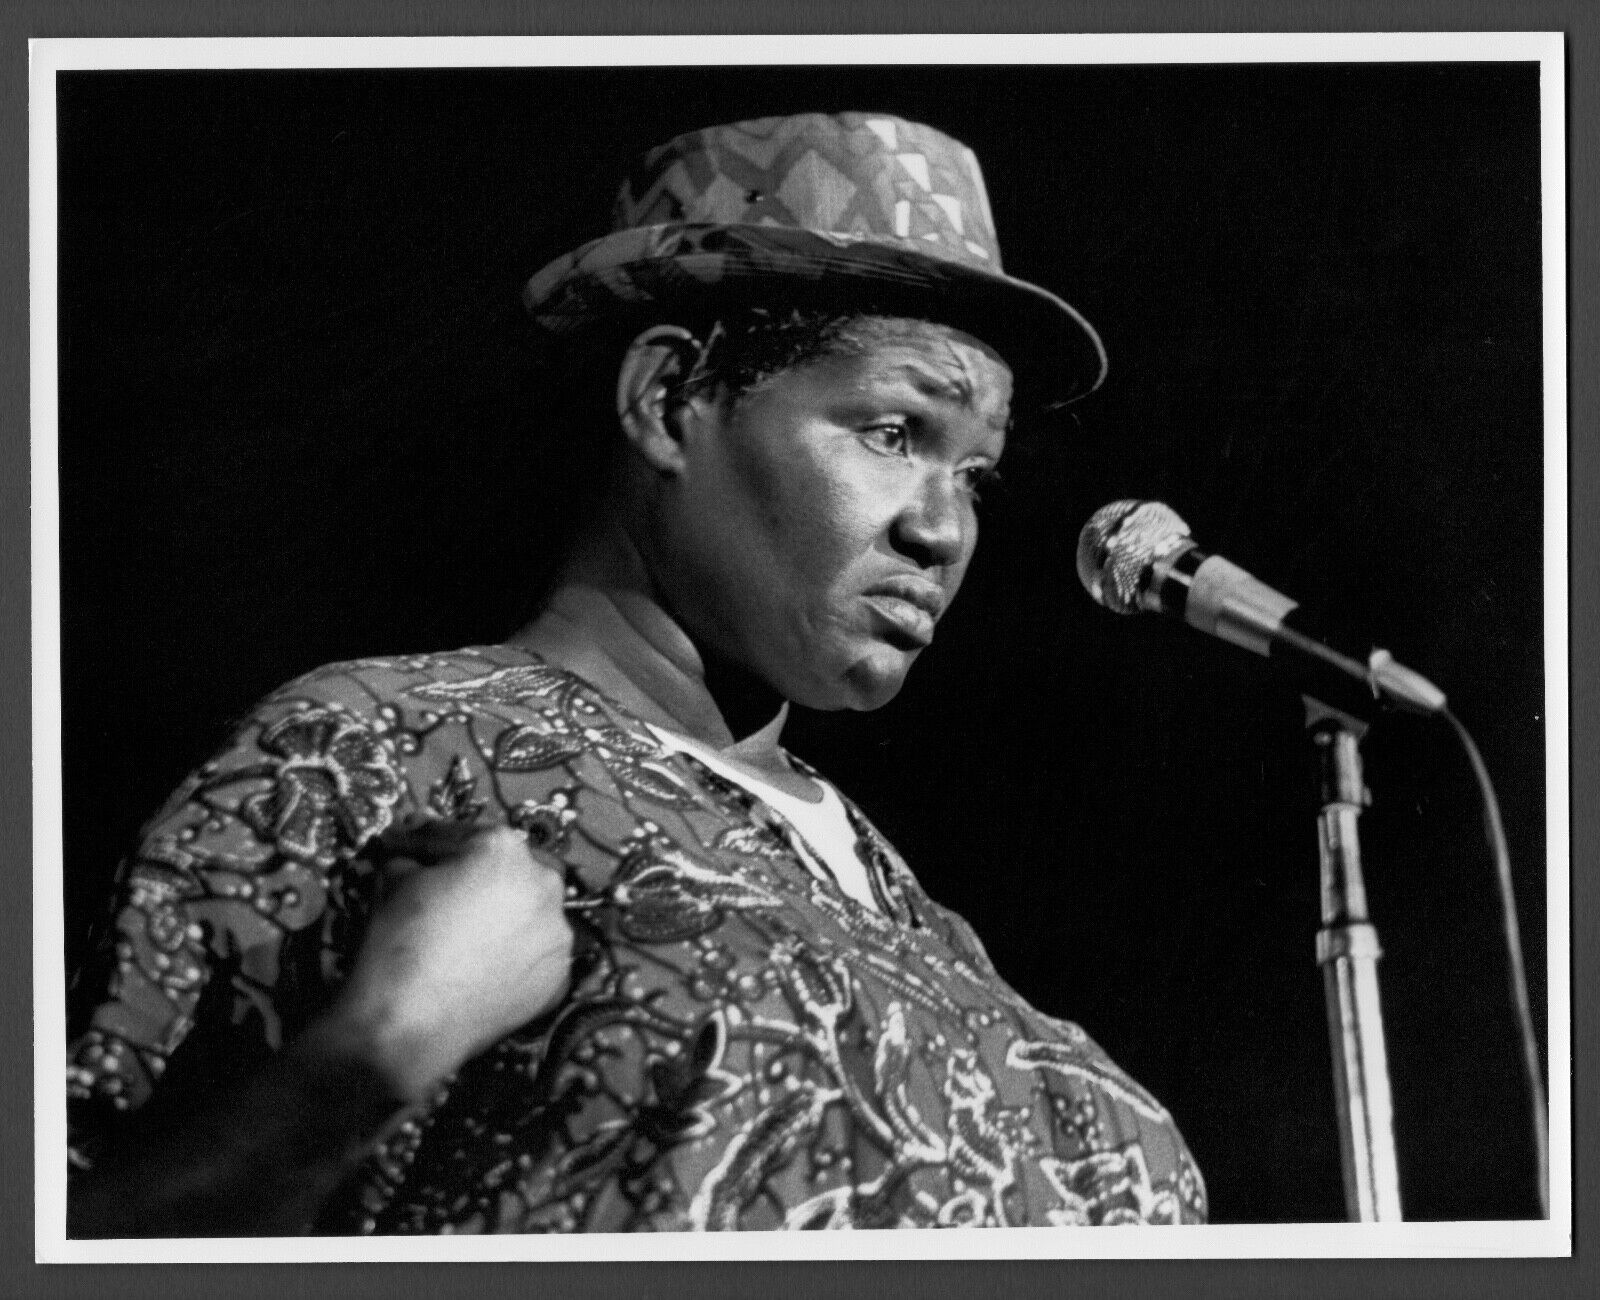 BIG MAMA THORNTON Super-cheap blues singer songwriter PHOTO All items in the store ORIG by TOM COPI